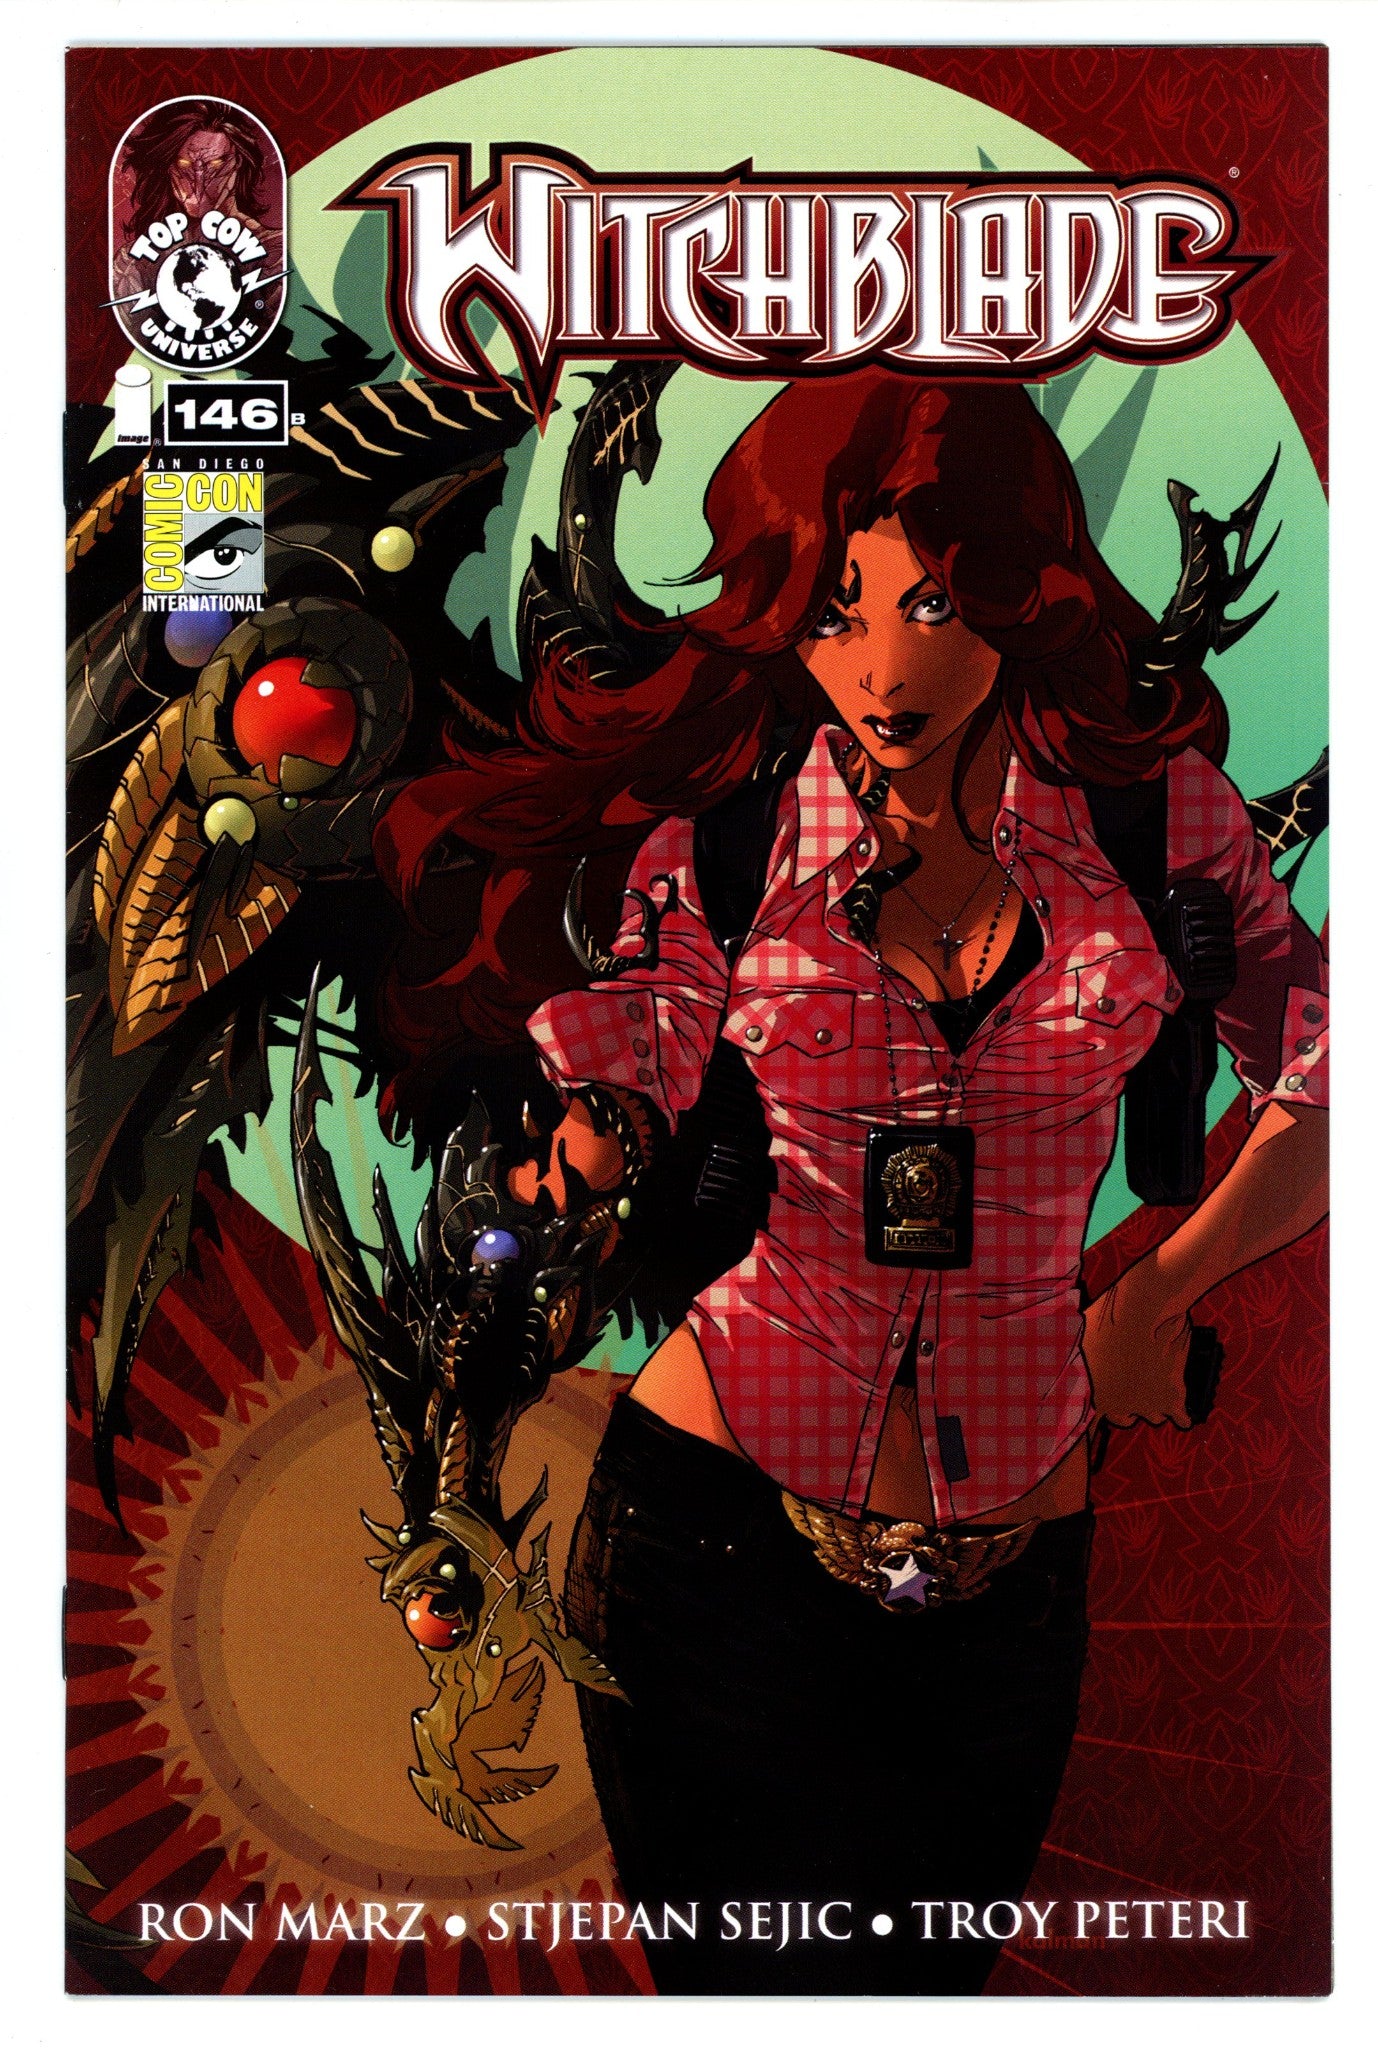 Witchblade Vol 1 146 VF (8.0) (2011) Andrasofszky Convention Variant 